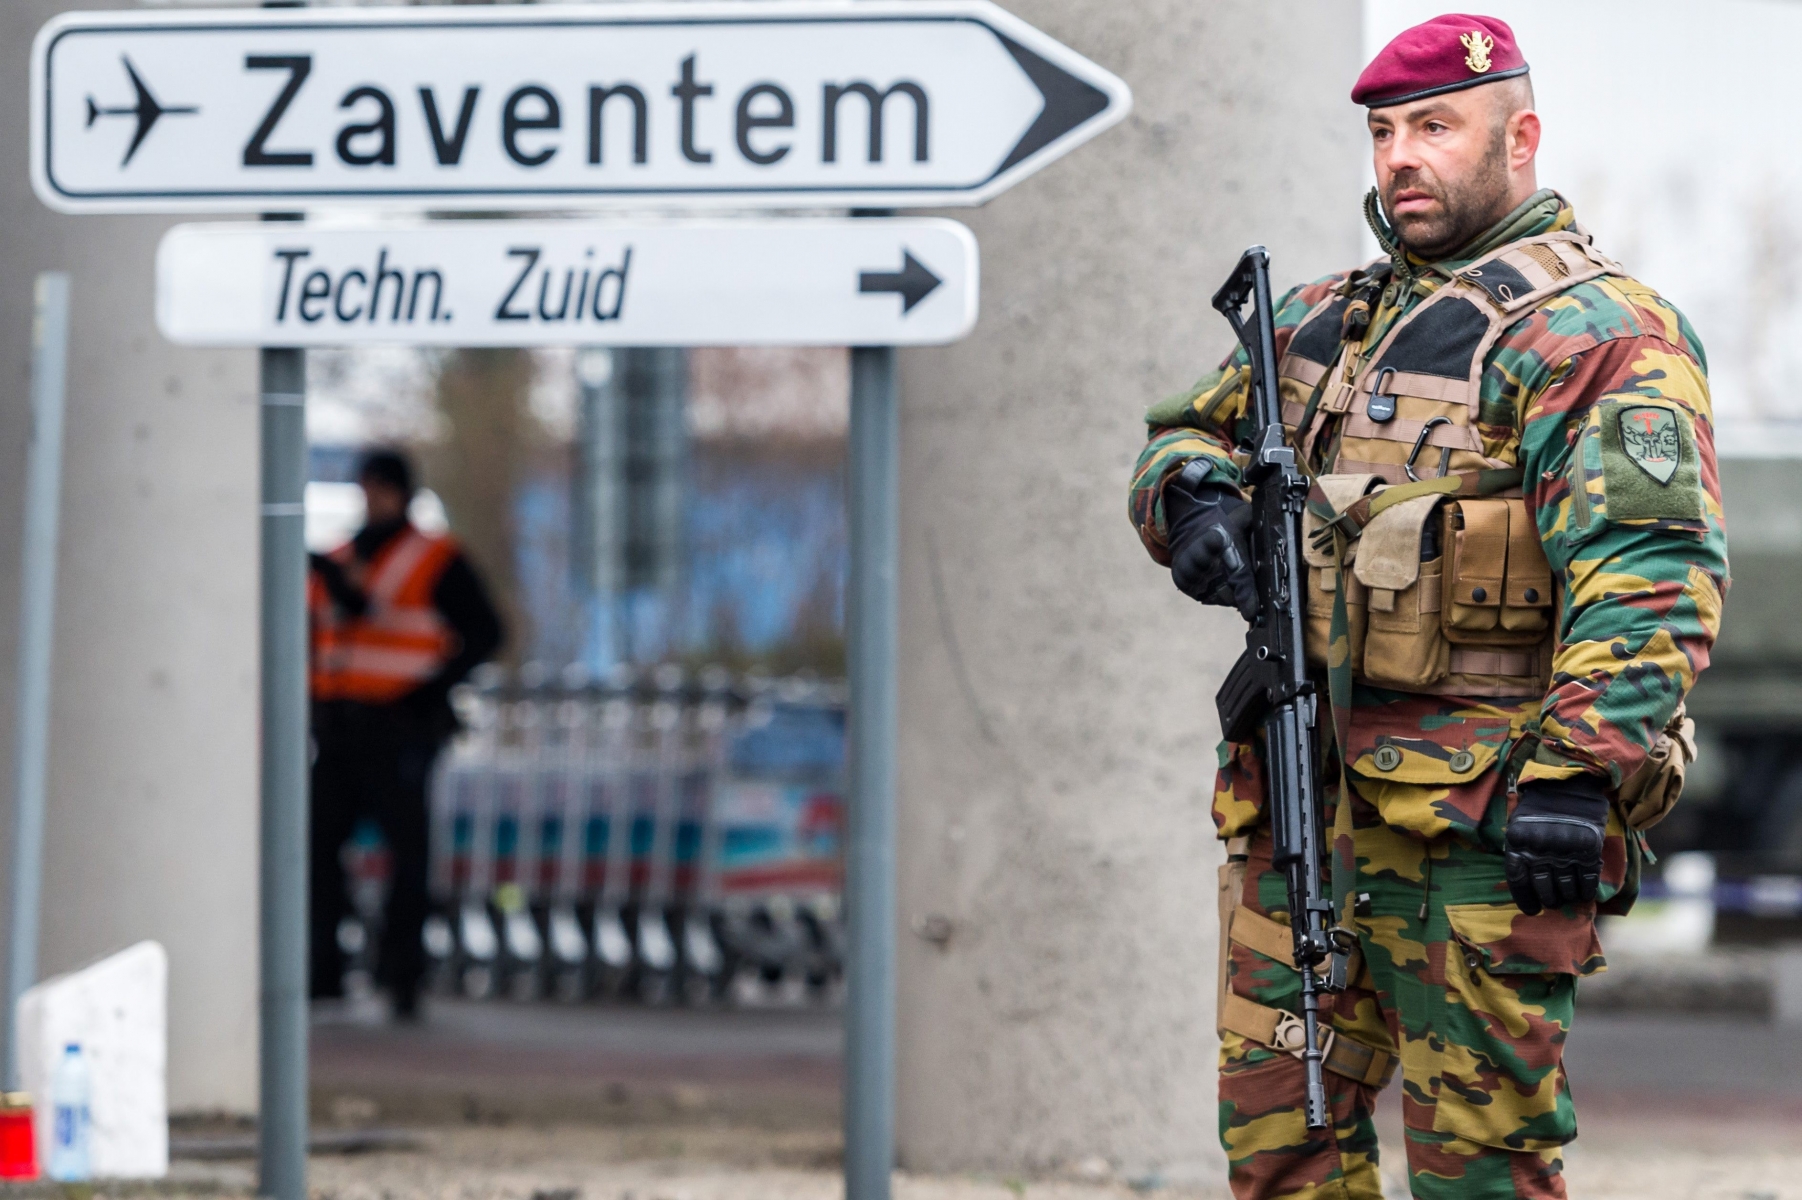 A Belgian Army soldier patrols at Zaventem Airport in Brussels on Wednesday, March 23, 2016. Belgian authorities were searching Wednesday for a top suspect in the country's deadliest attacks in decades, as the European Union's capital awoke under guard and with limited public transport after 34 were killed in bombings on the Brussels airport and a subway station. (AP Photo/Geert Vanden Wijngaert) Belgium Attacks